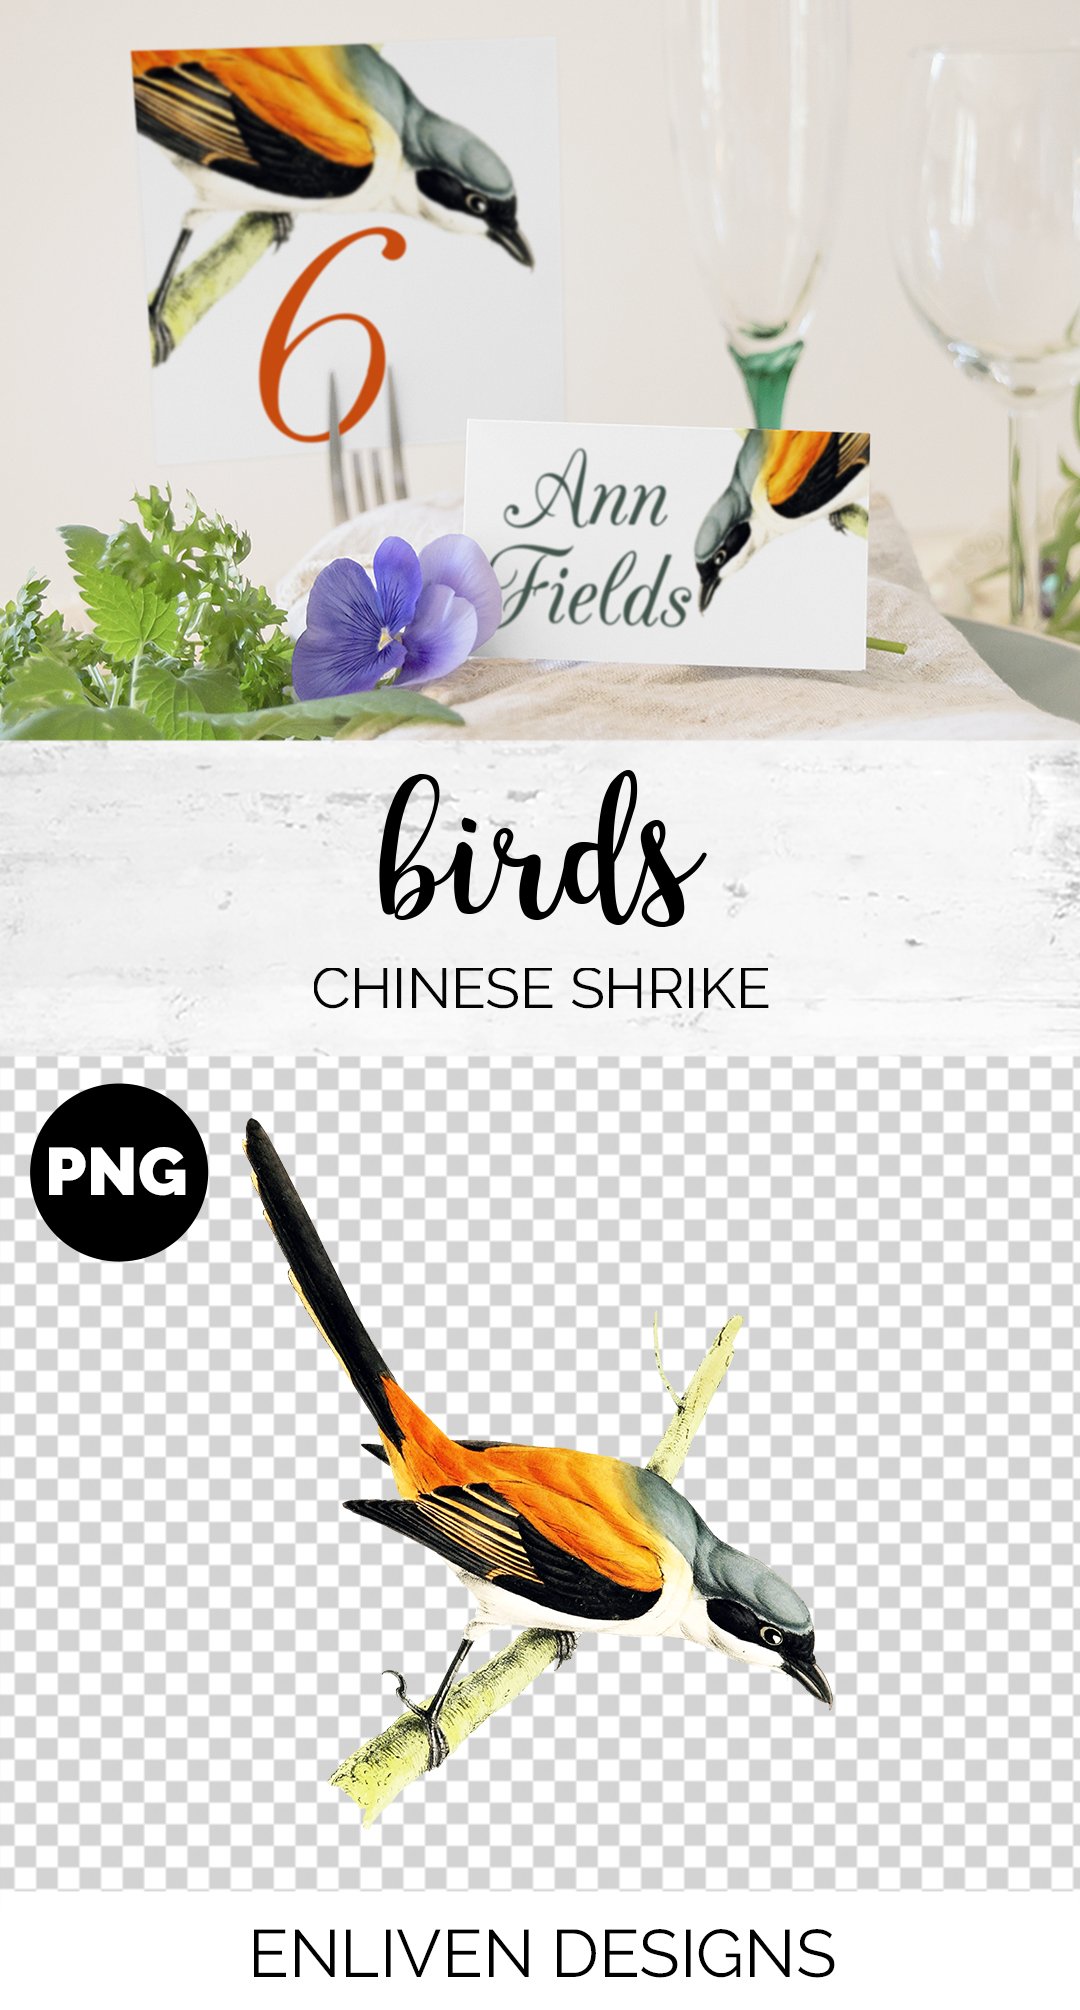 Shrike Chinese Watercolor Bird preview image.